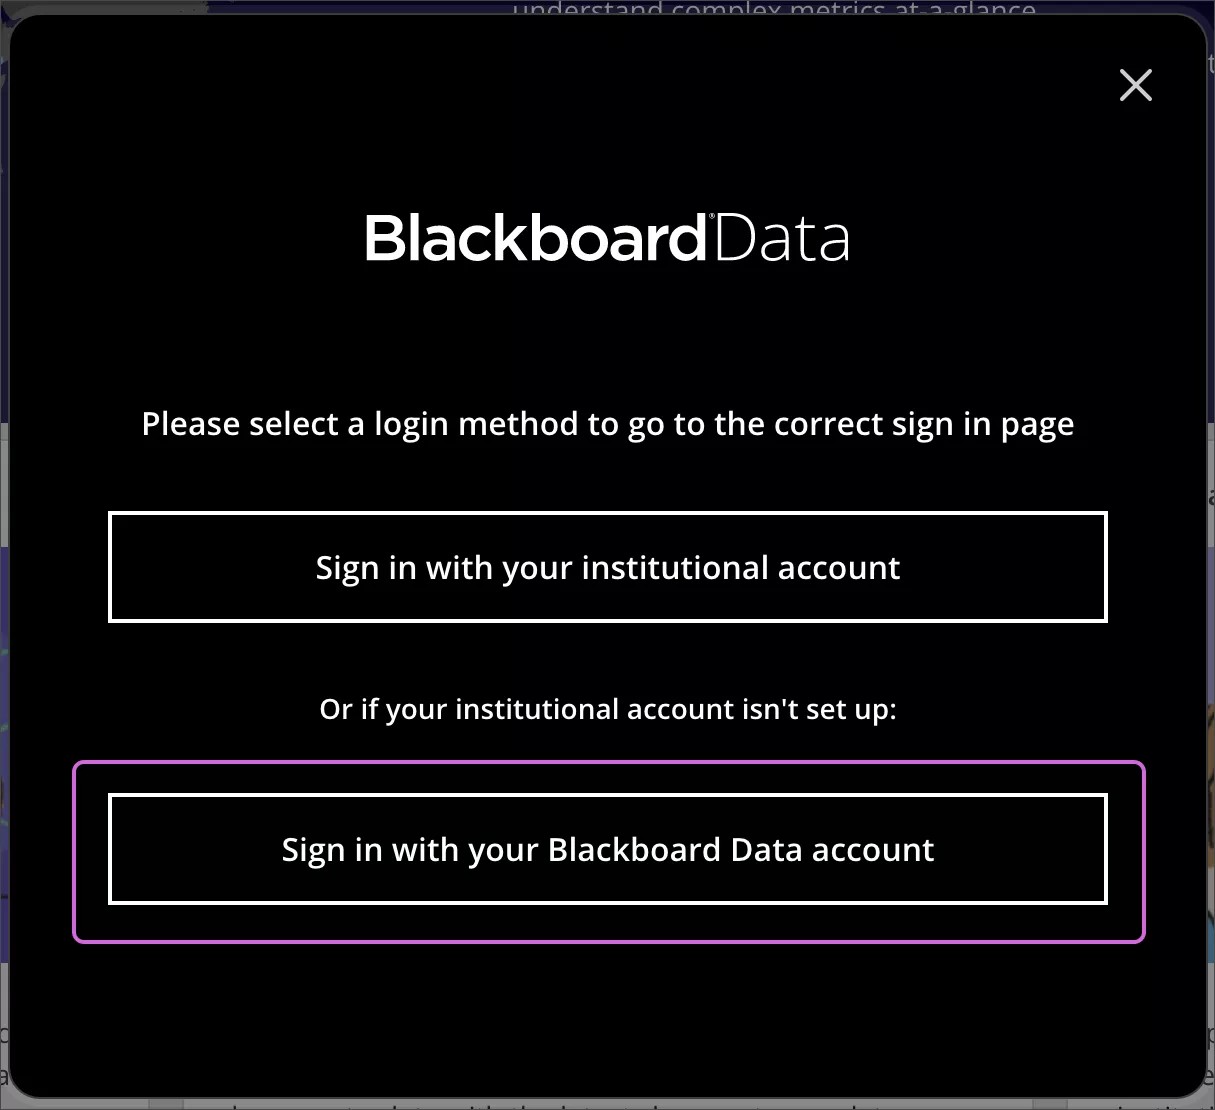 Blackboard Data Log in method screen. First option is Sign in with your institutional account and the second option is to Sign in with your Blackboard Data Account.